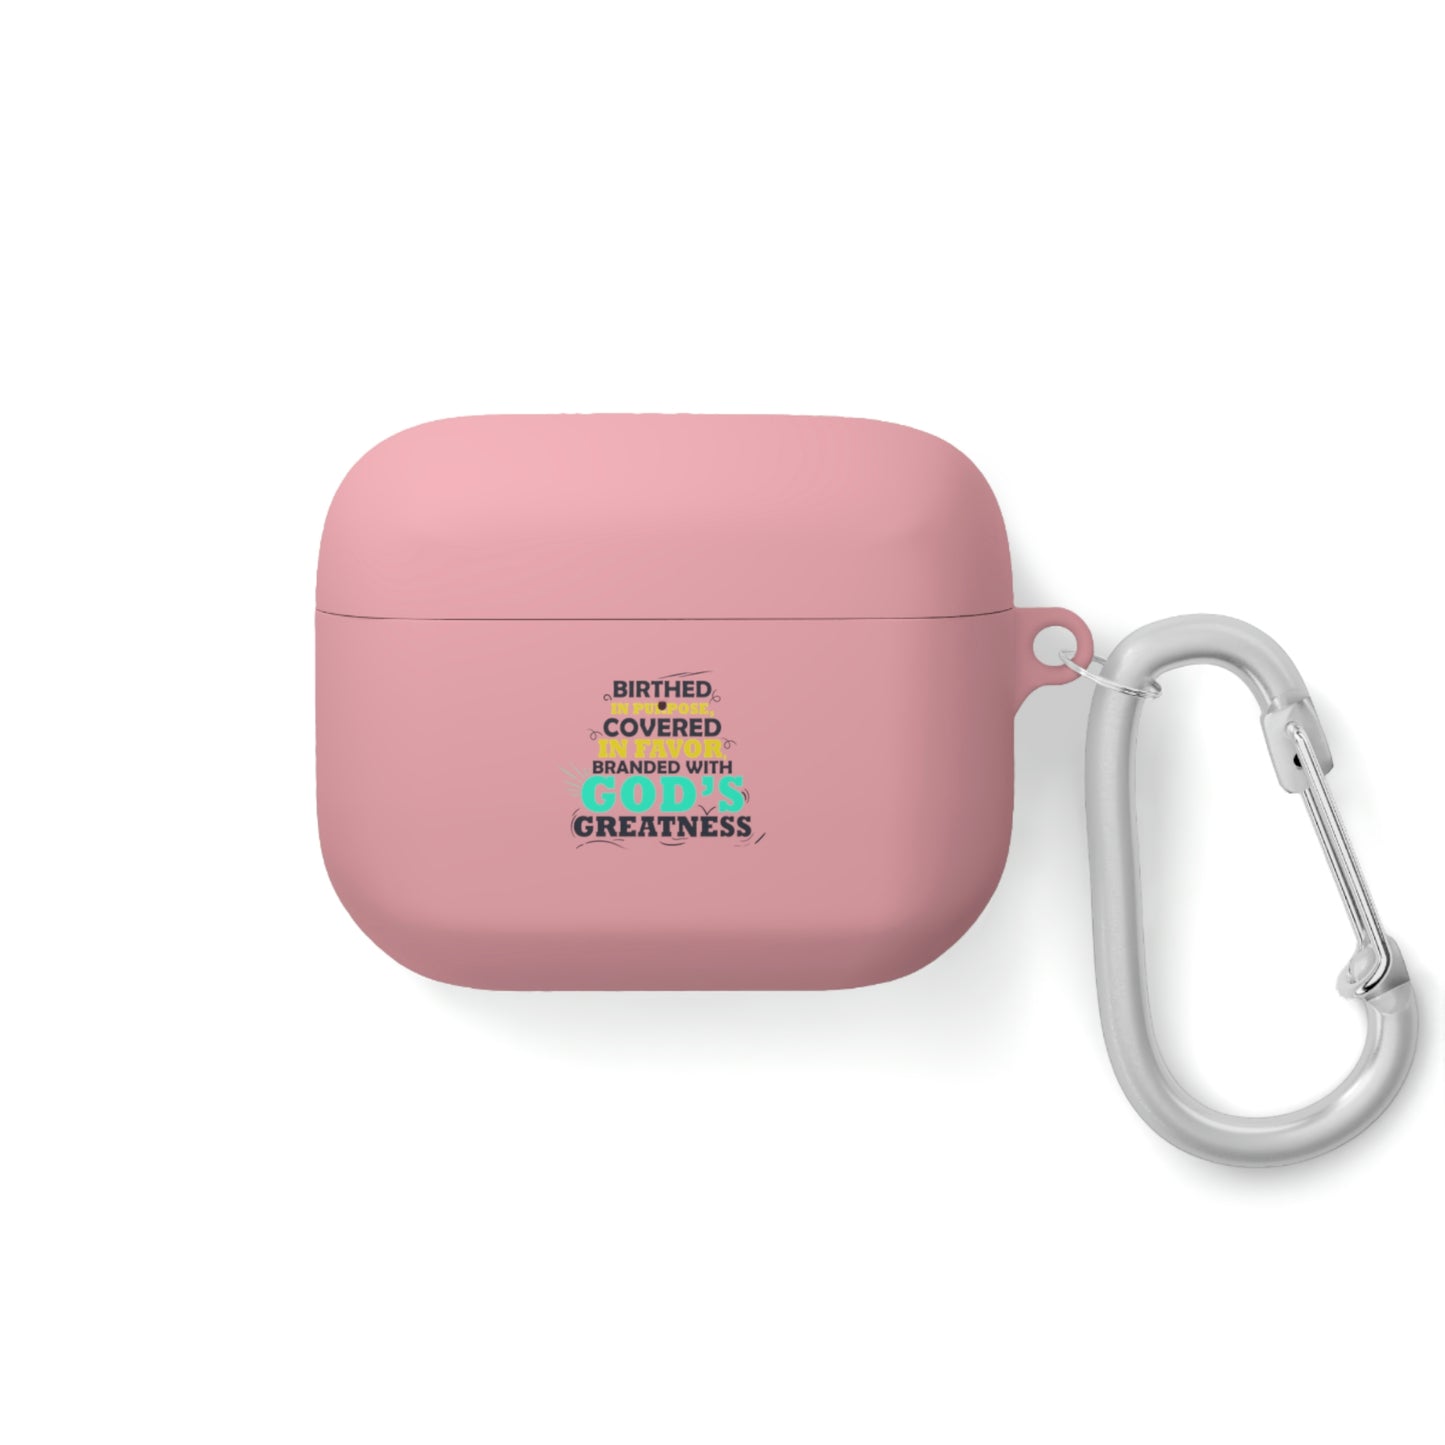 Birthed In Purpose, Covered In Favor, Branded With God's Greatness AirPods / Airpods Pro Case cover